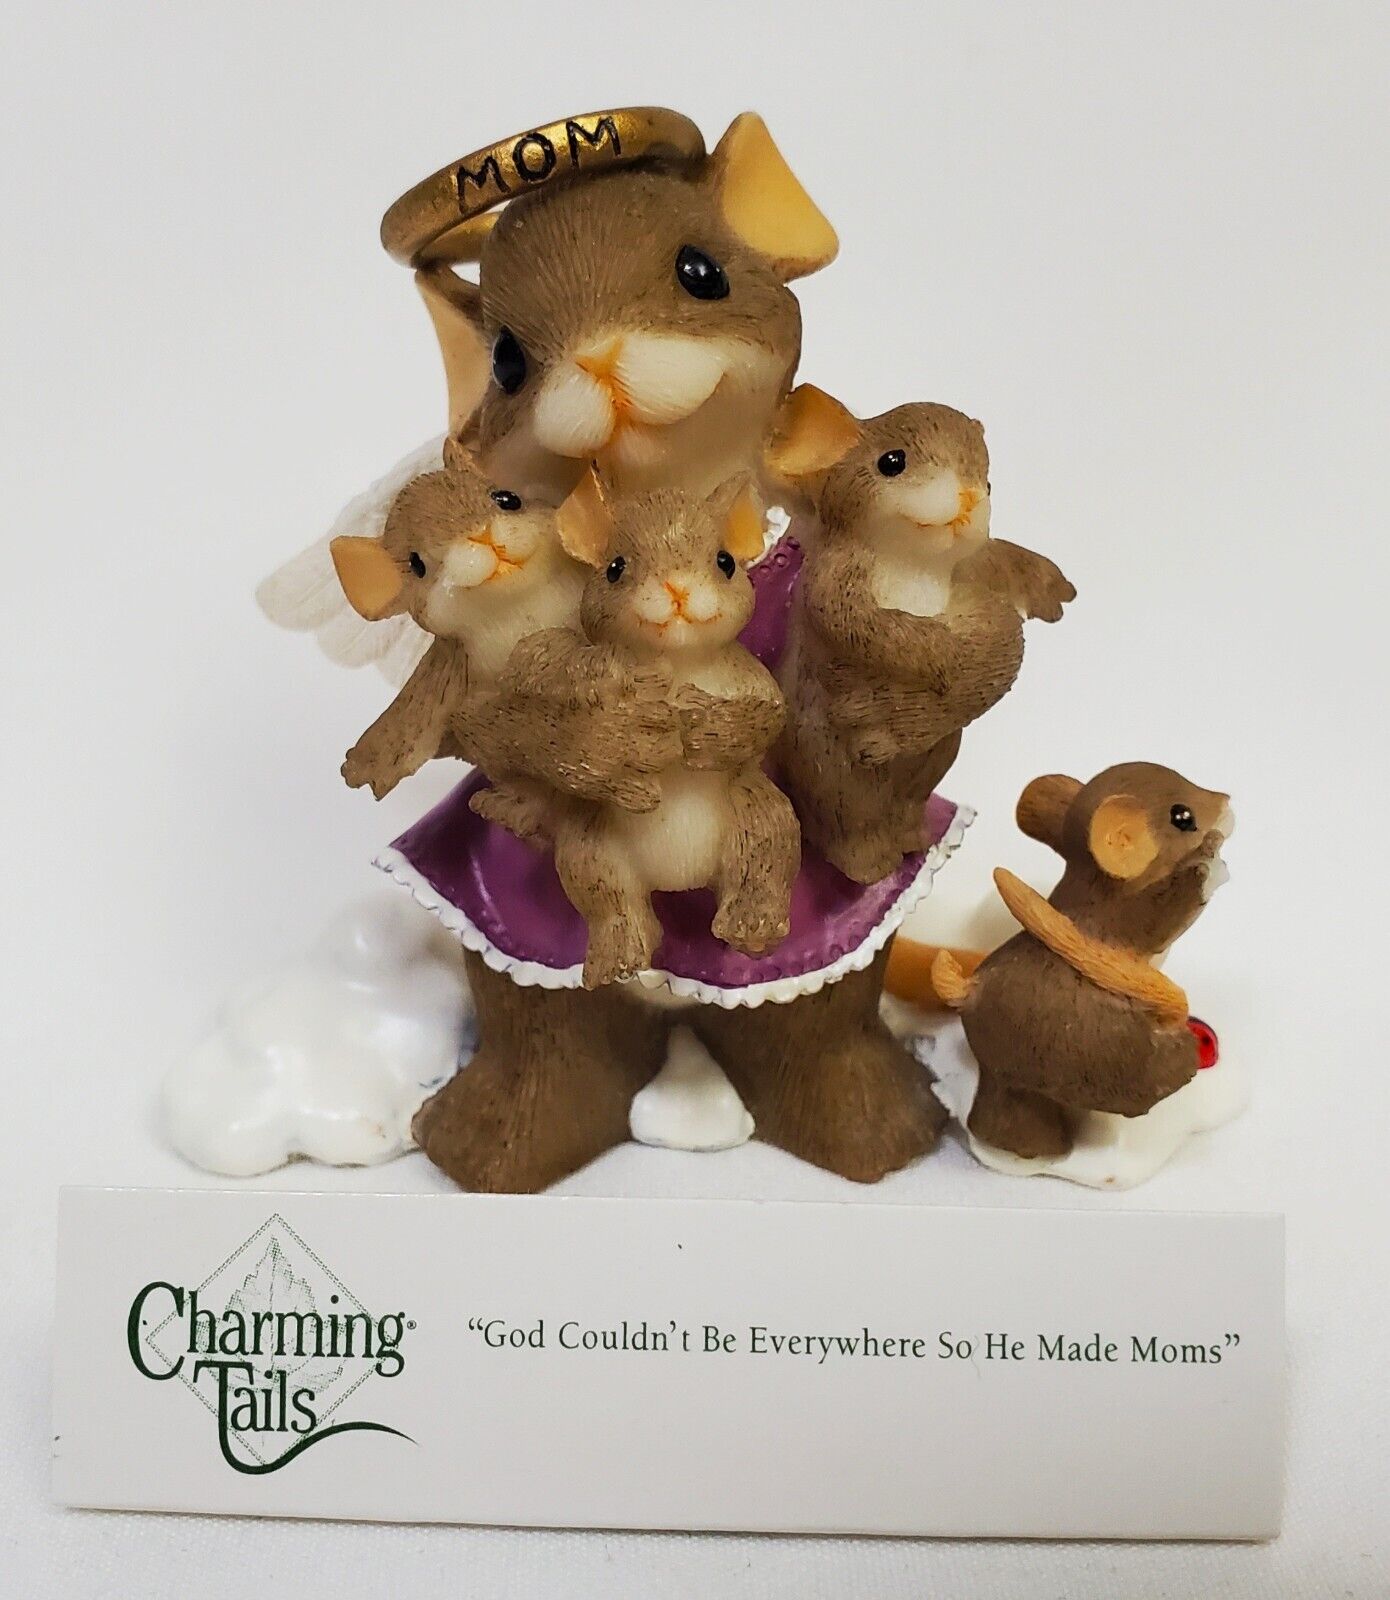 Charming Tails: God Couldn't Be Everywhere, So He Made Moms - 81/1013 - *Rare*